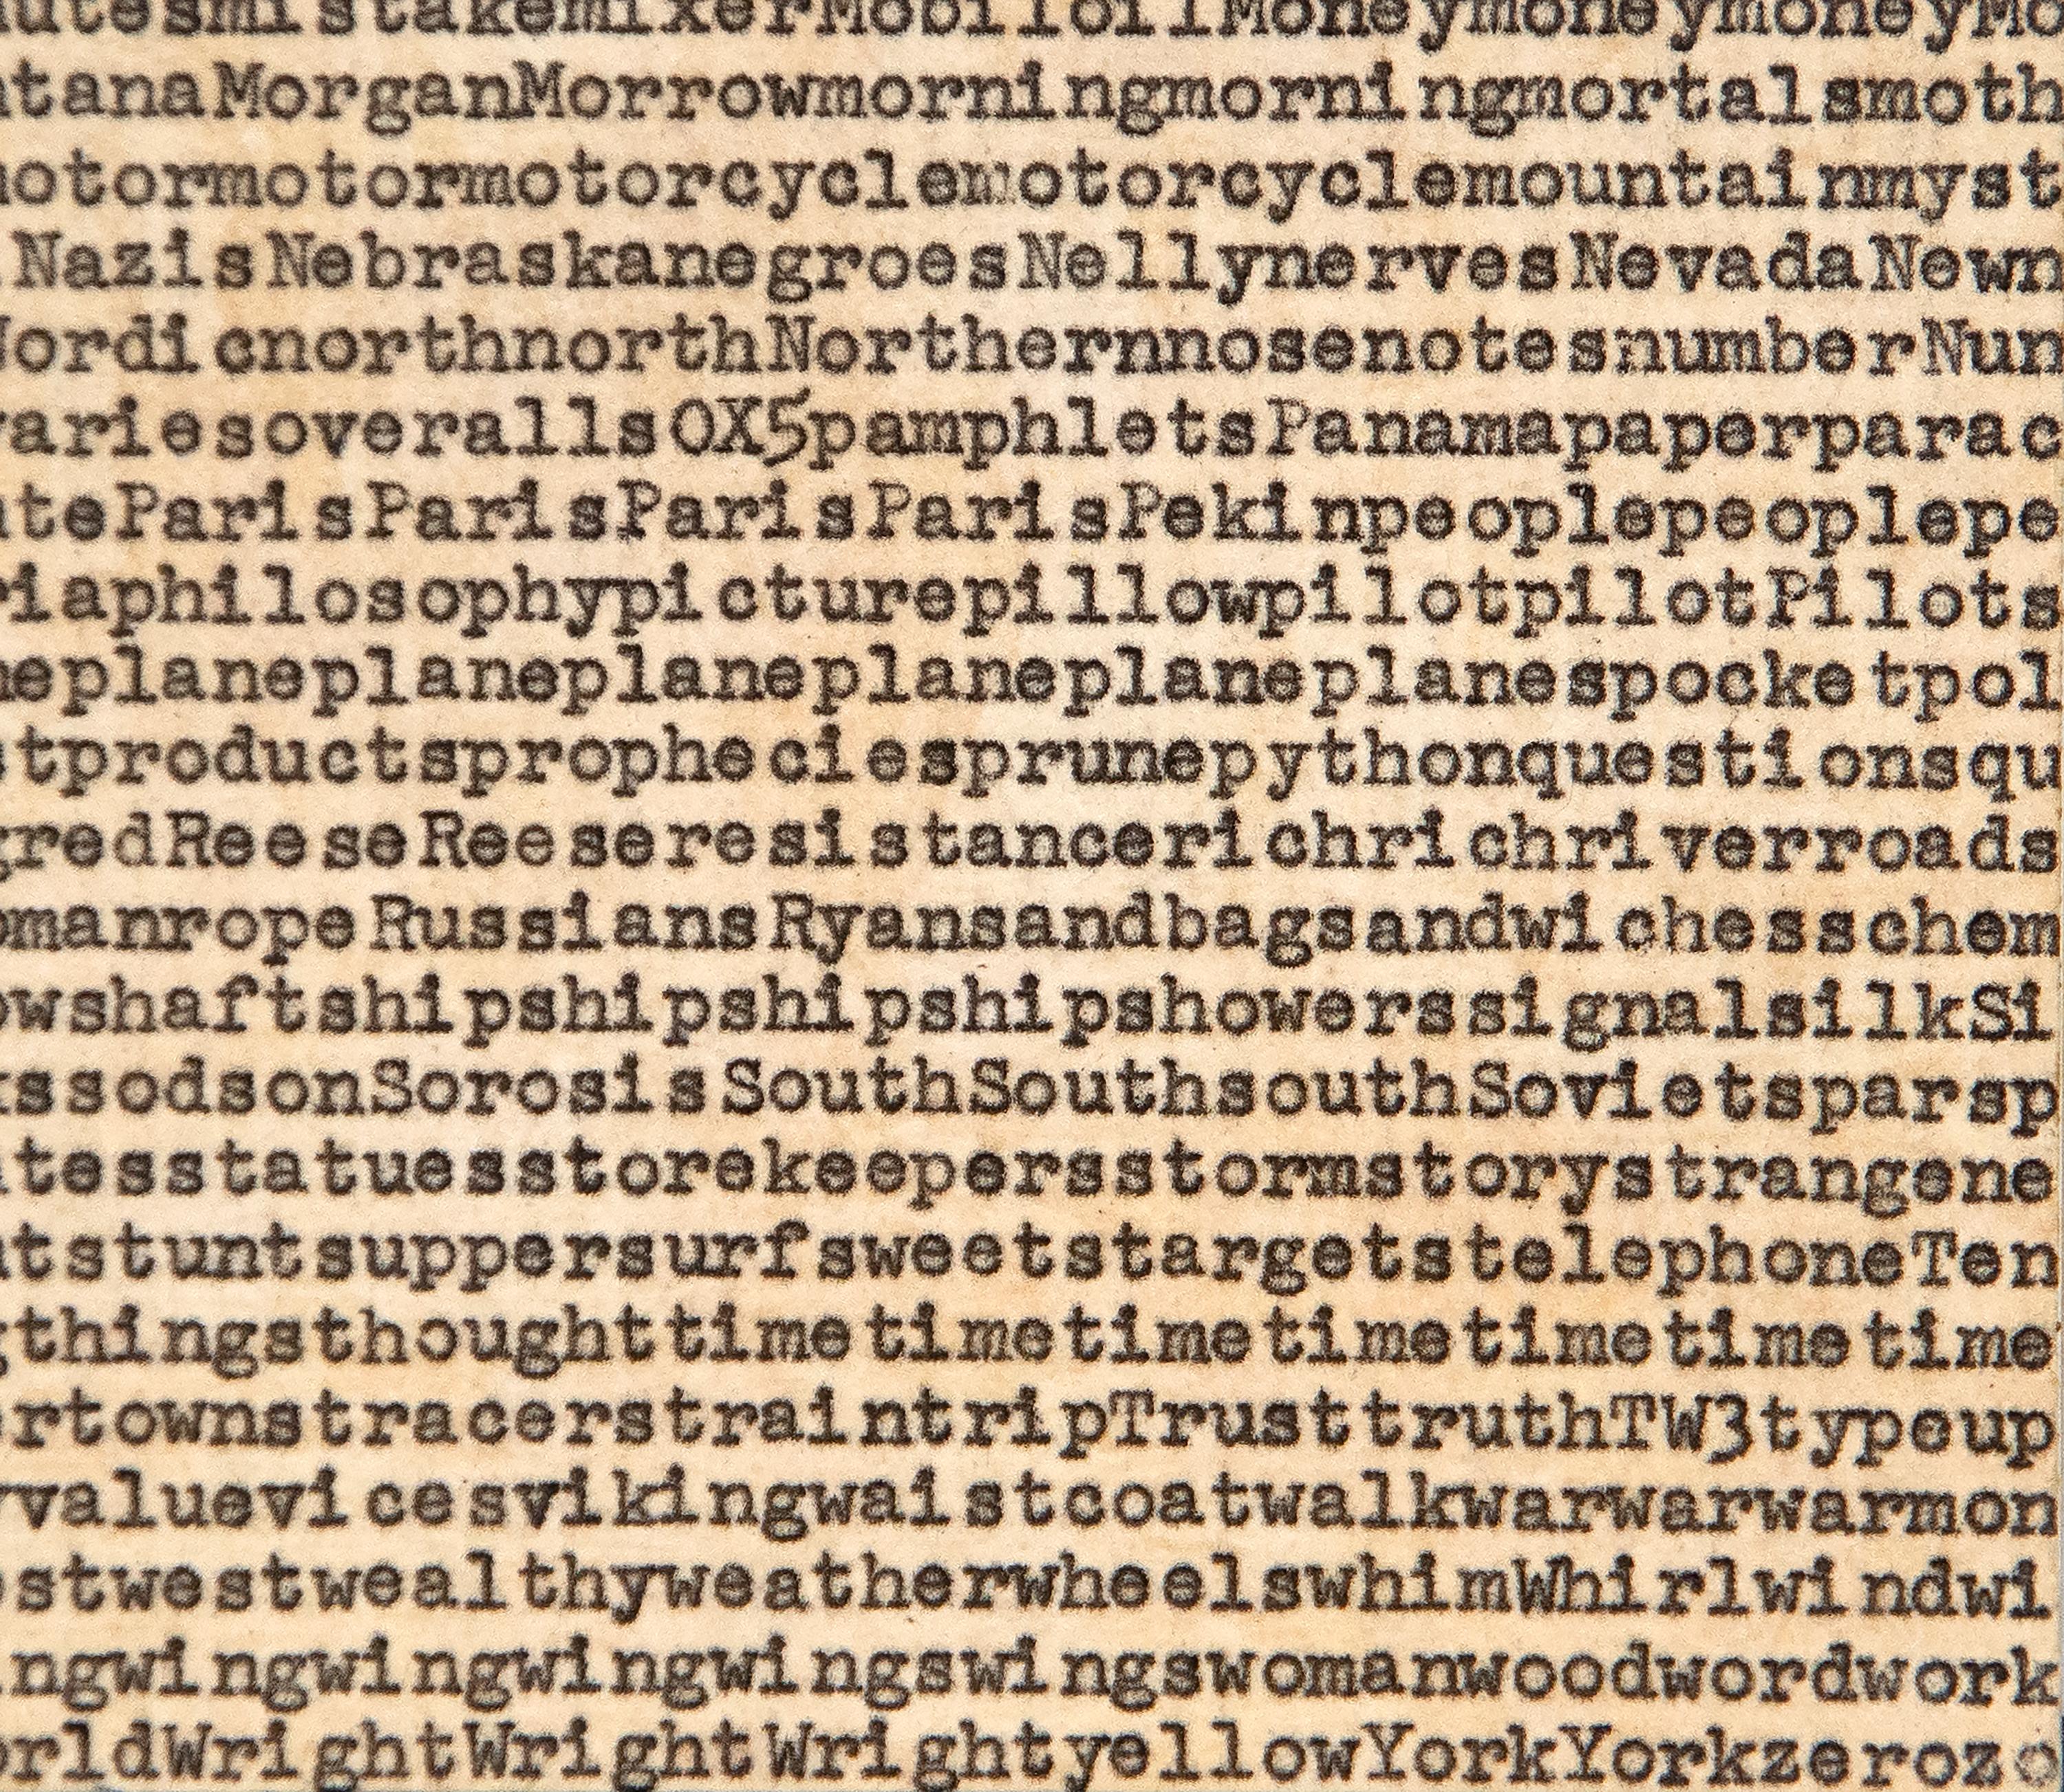 Five Hundred Terms for Charles A. Lindbergh - Post-War Mixed Media Art by Carl Andre